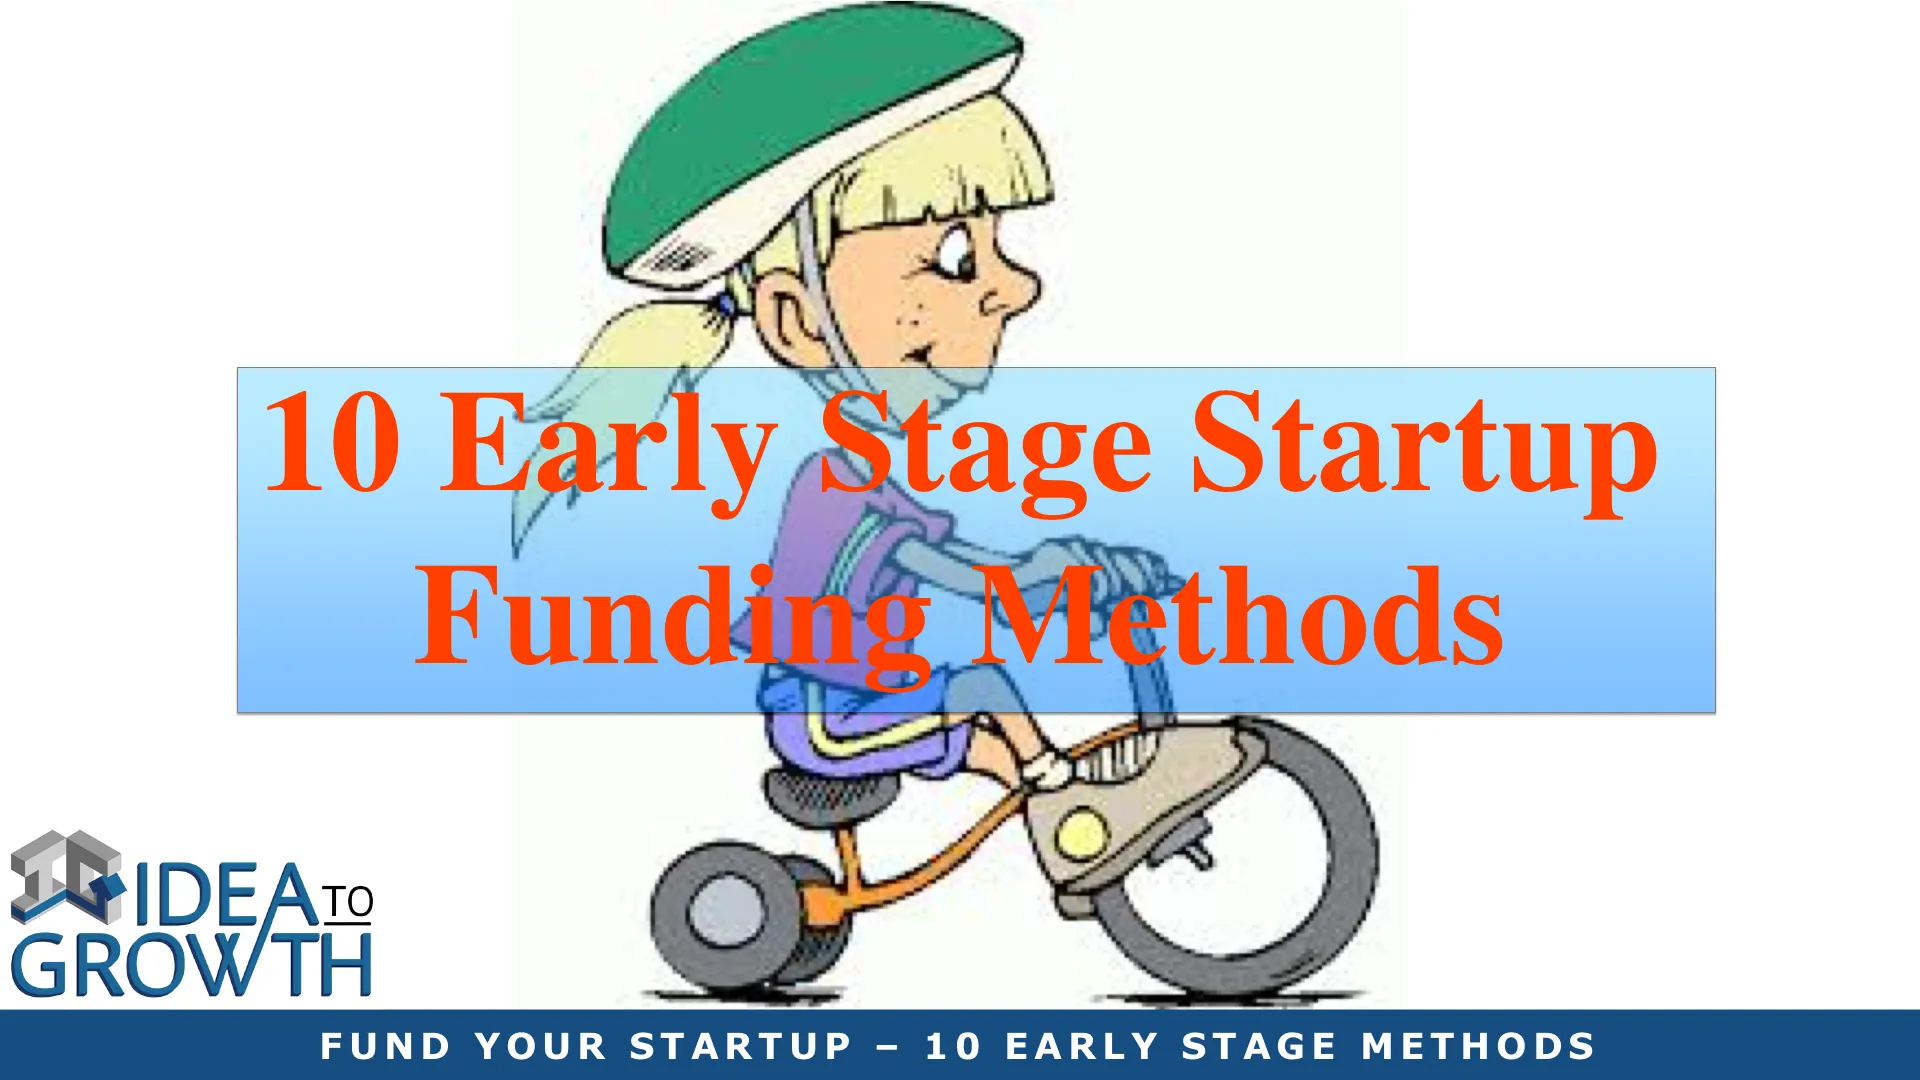 FUND YOUR STARTUP – 10 EARLY STAGE METHODS